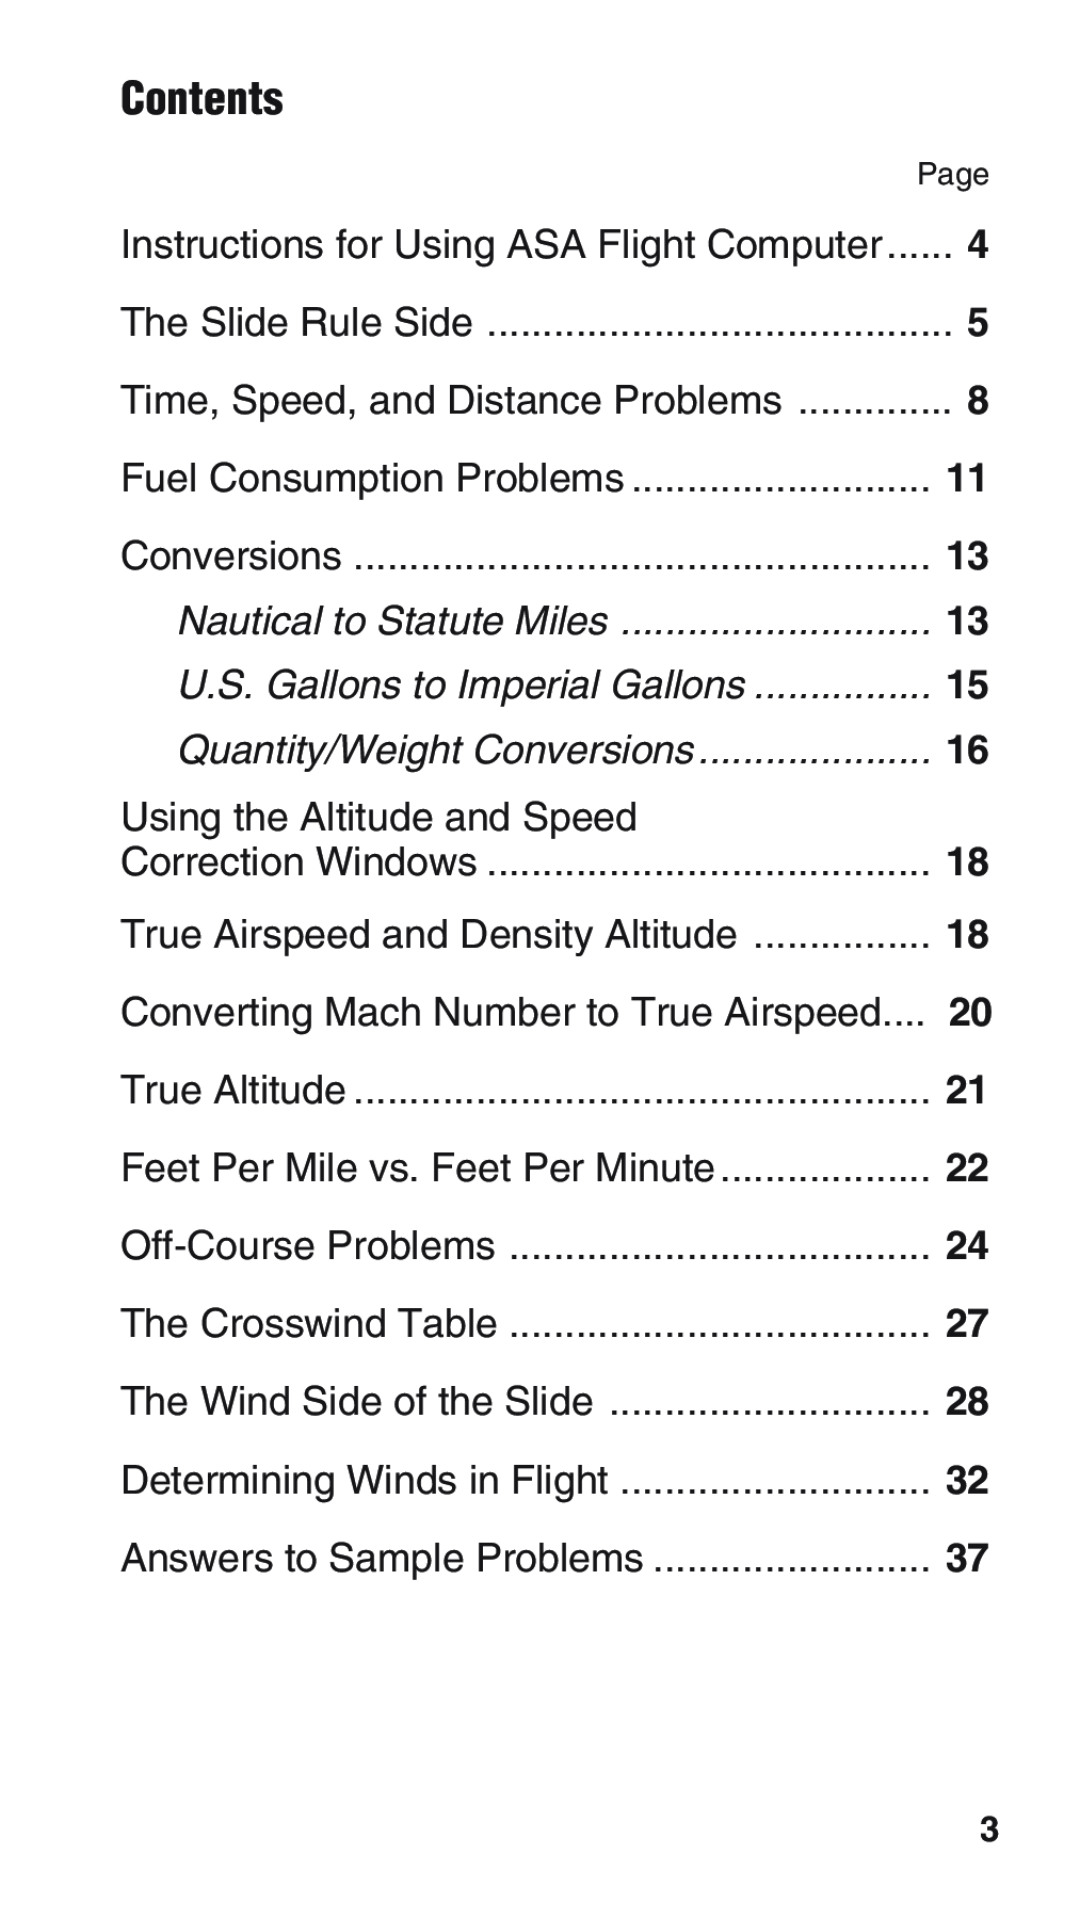 ASA Electronics E6-B manual Contents, Conversions, Using the Altitude and Speed, True Altitude, The Slide Rule Side 